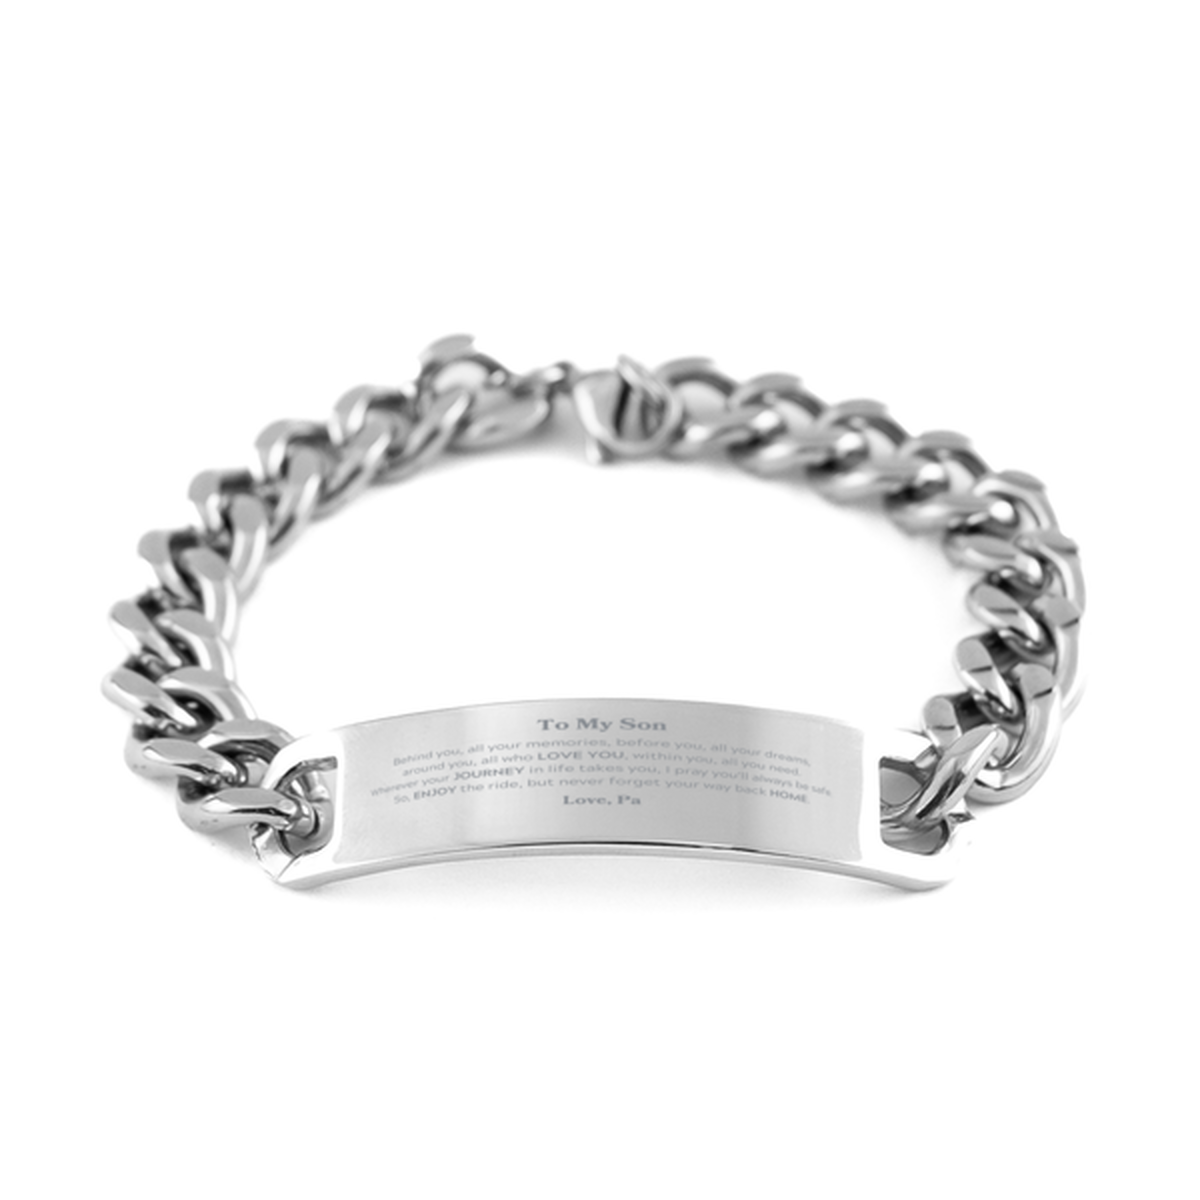 To My Son Graduation Gifts from Pa, Son Cuban Chain Stainless Steel Bracelet Christmas Birthday Gifts for Son Behind you, all your memories, before you, all your dreams. Love, Pa